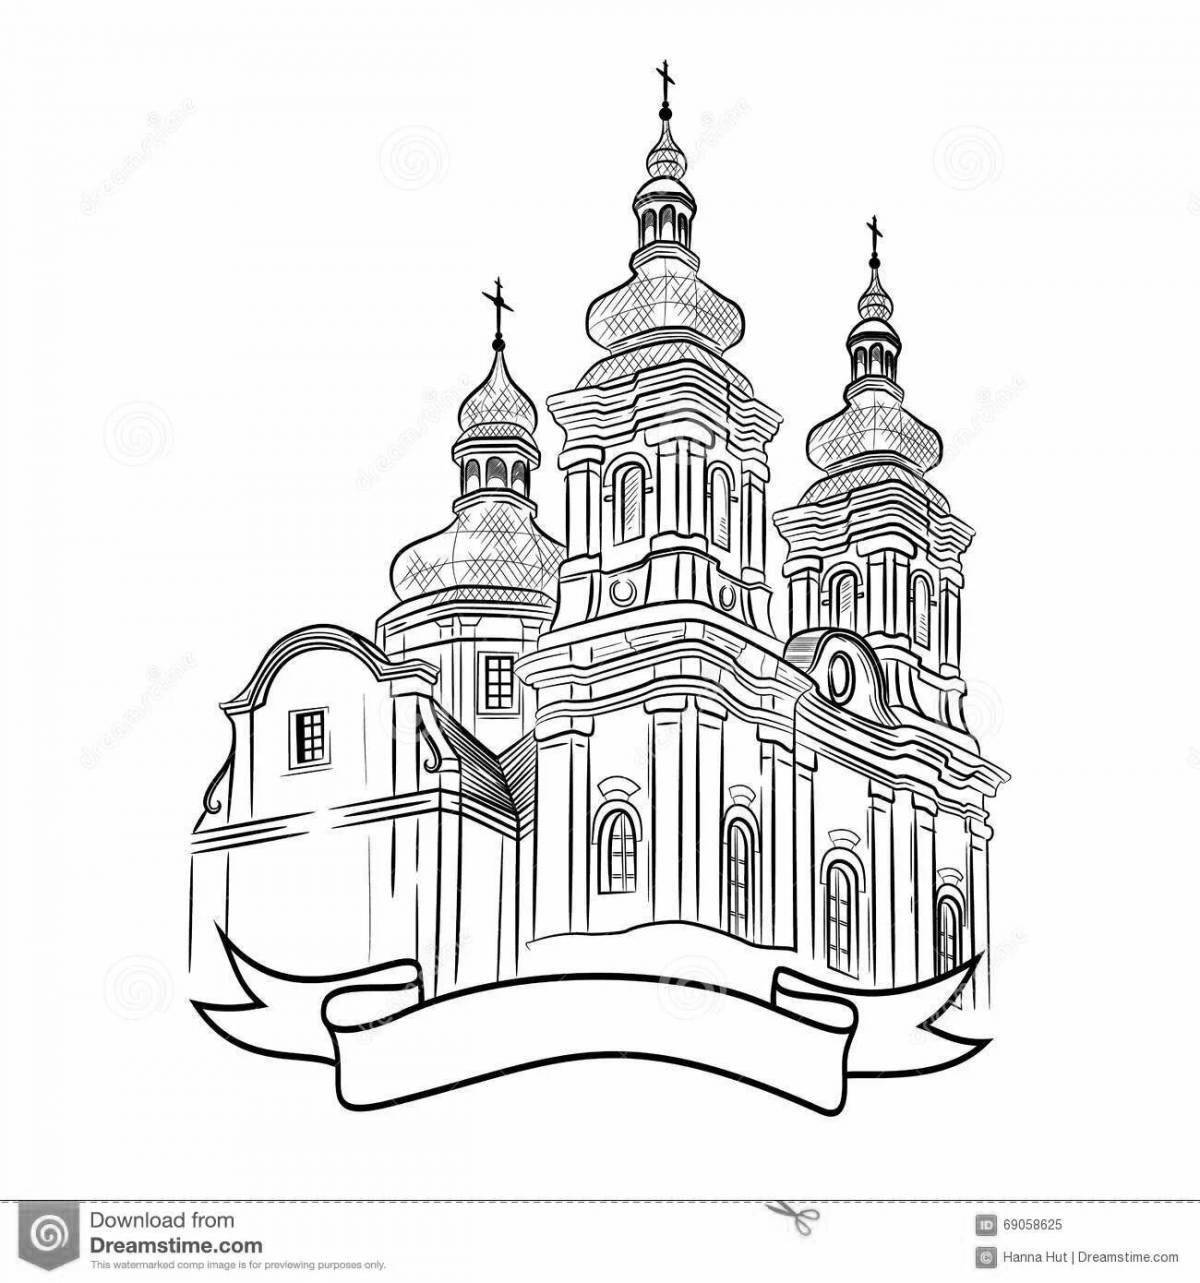 Coloring page amazing church with domes